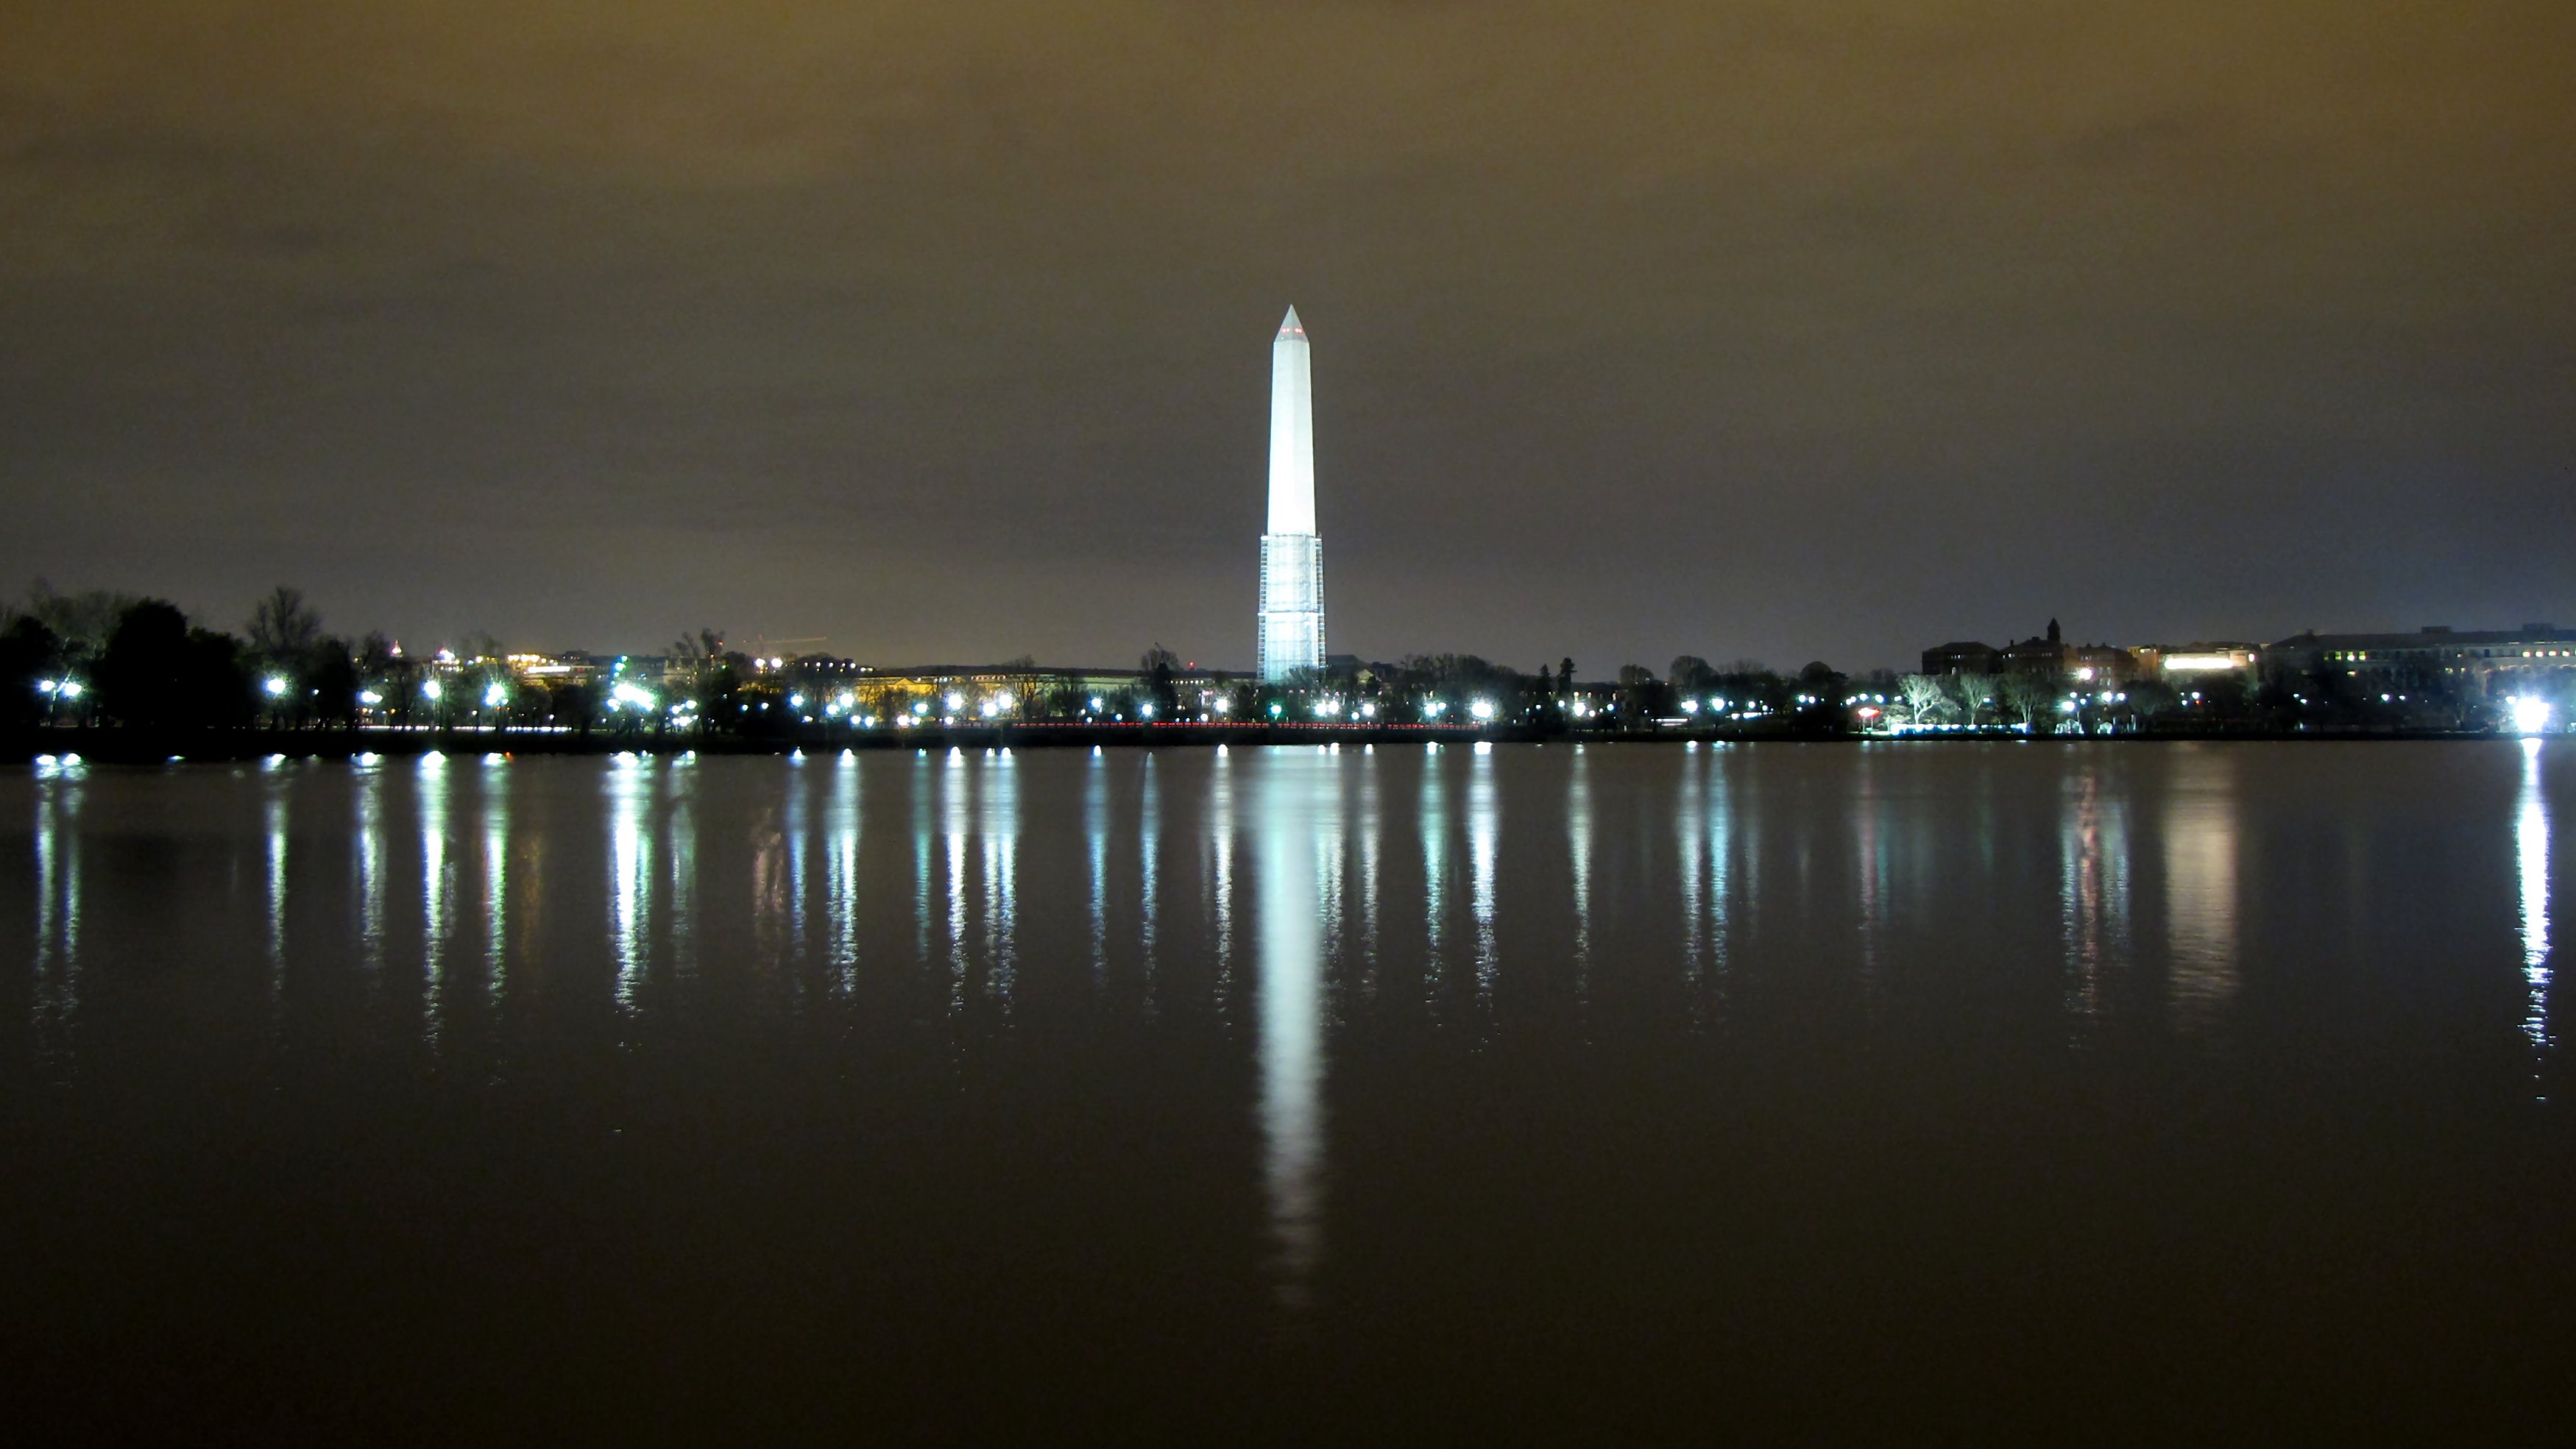 Photograph of the view of the Washington Monument from across the Tidal Basin at night.